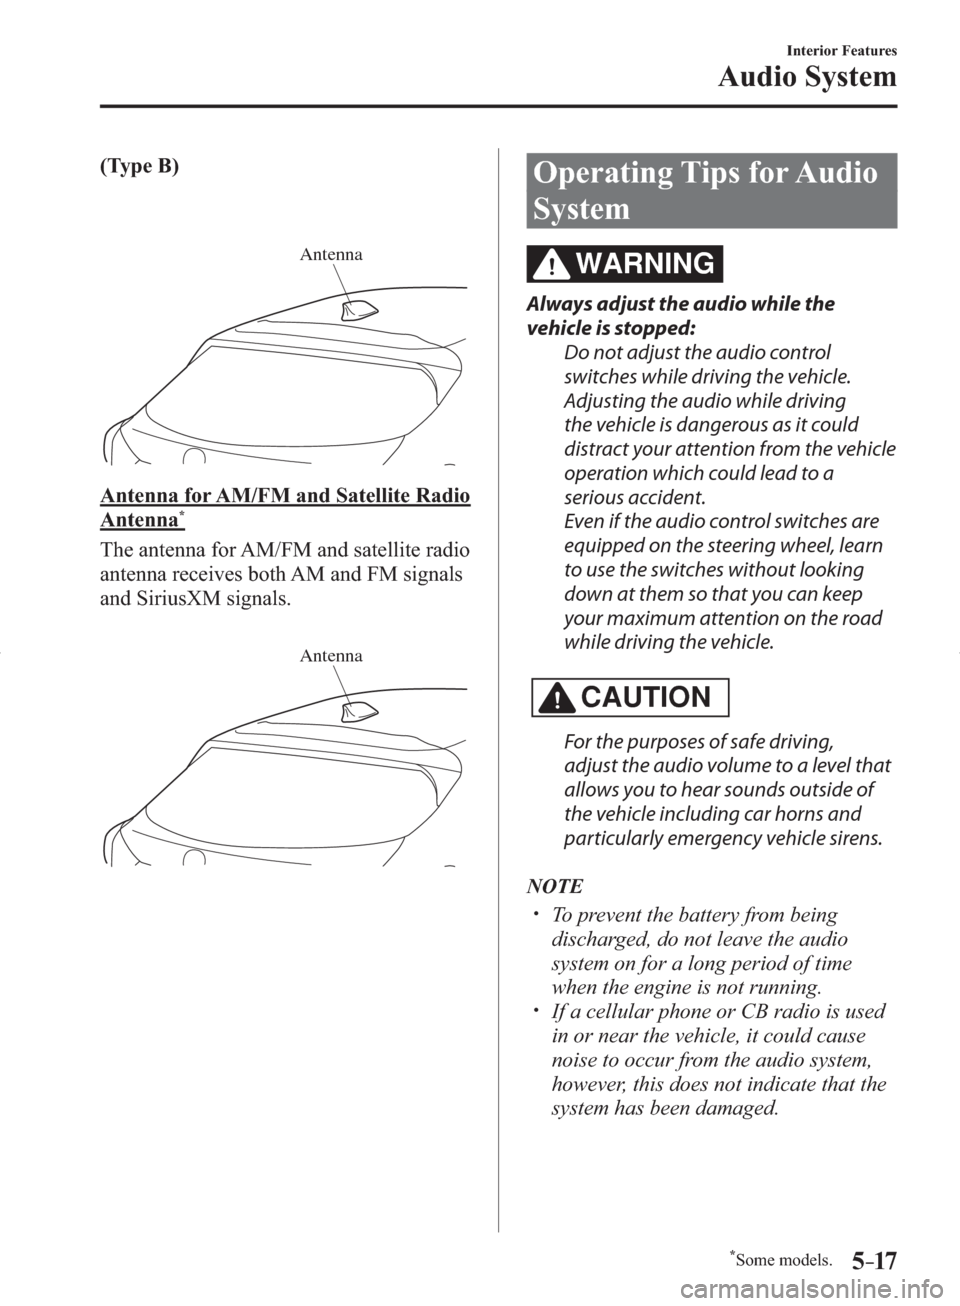 MAZDA MODEL 3 HATCHBACK 2014  Owners Manual (in English) *Some models.5–17
Interior Features
Audio System
  (Type  B)
Antenna
  Antenna for AM/FM and Satellite Radio 
Antenna*
    The antenna for AM/FM and satellite radio 
antenna receives both AM and FM 